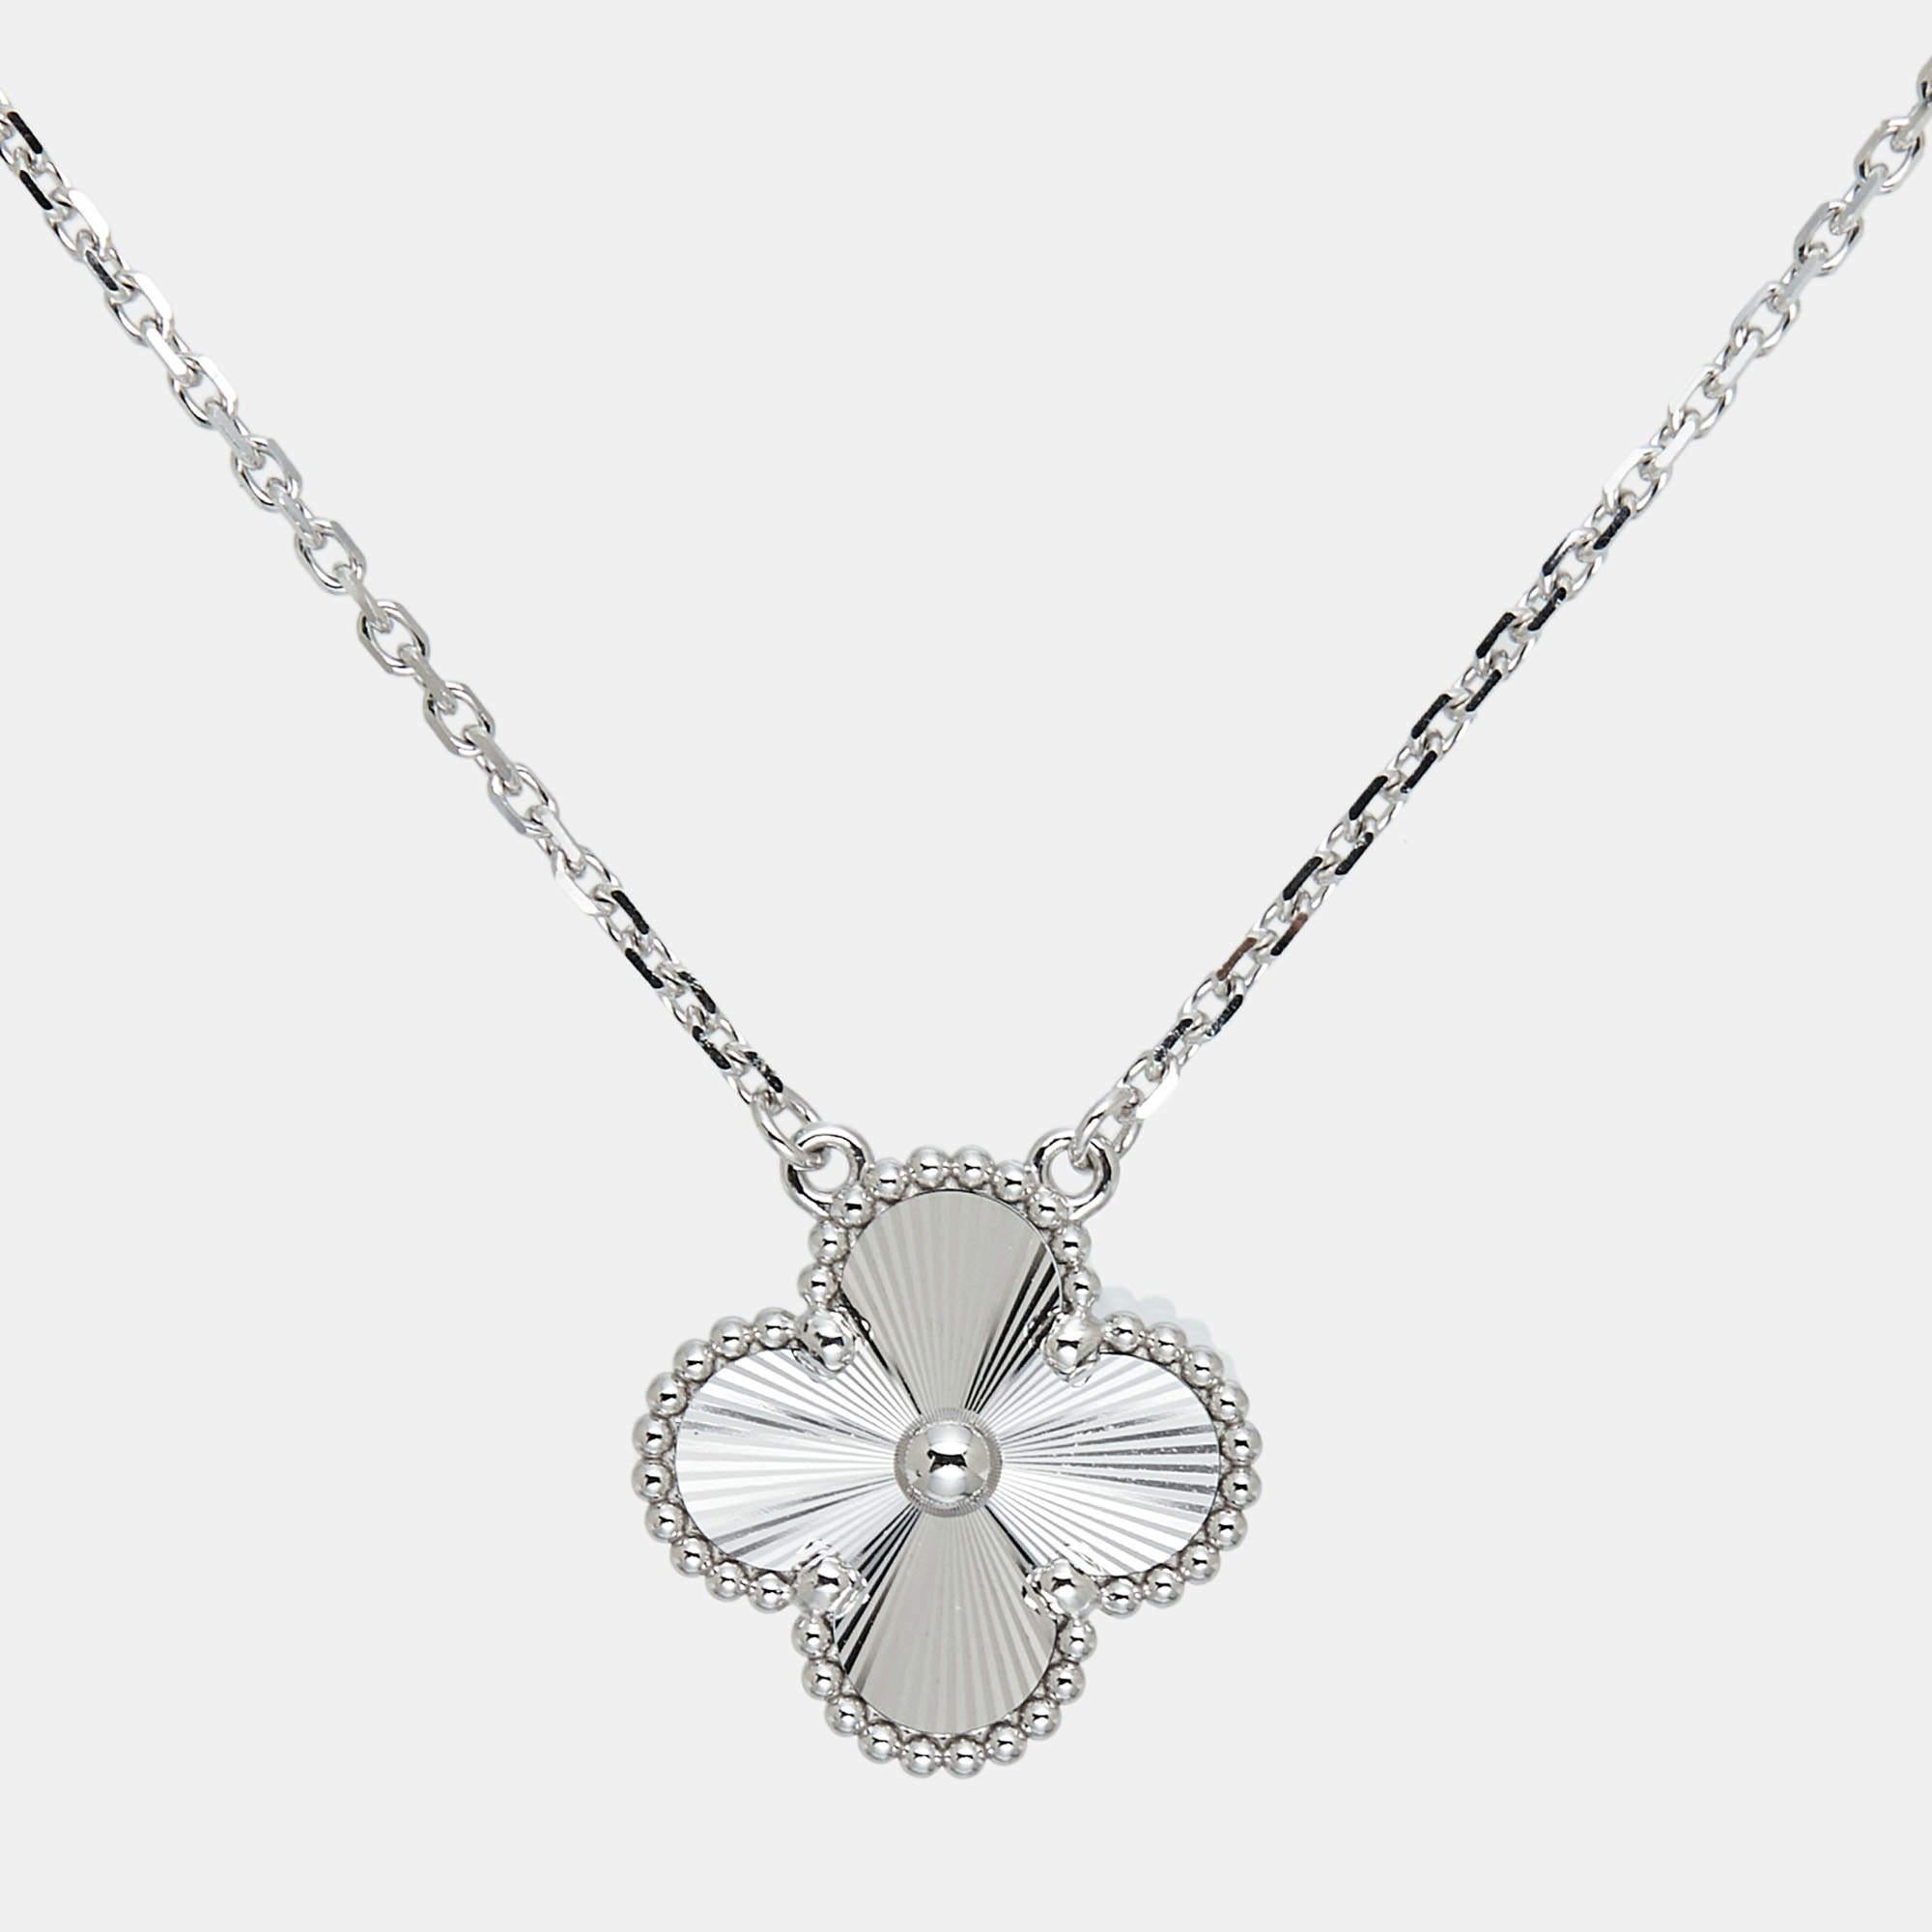 Van Cleef & Arpels’ Alhambra jewel was first created in 1968, and the Vintage Alhambra creations remain faithful to its timeless elegance. The iconic clover motif is a potent symbol of luck and here, it comes in 18k white gold, adorned with a